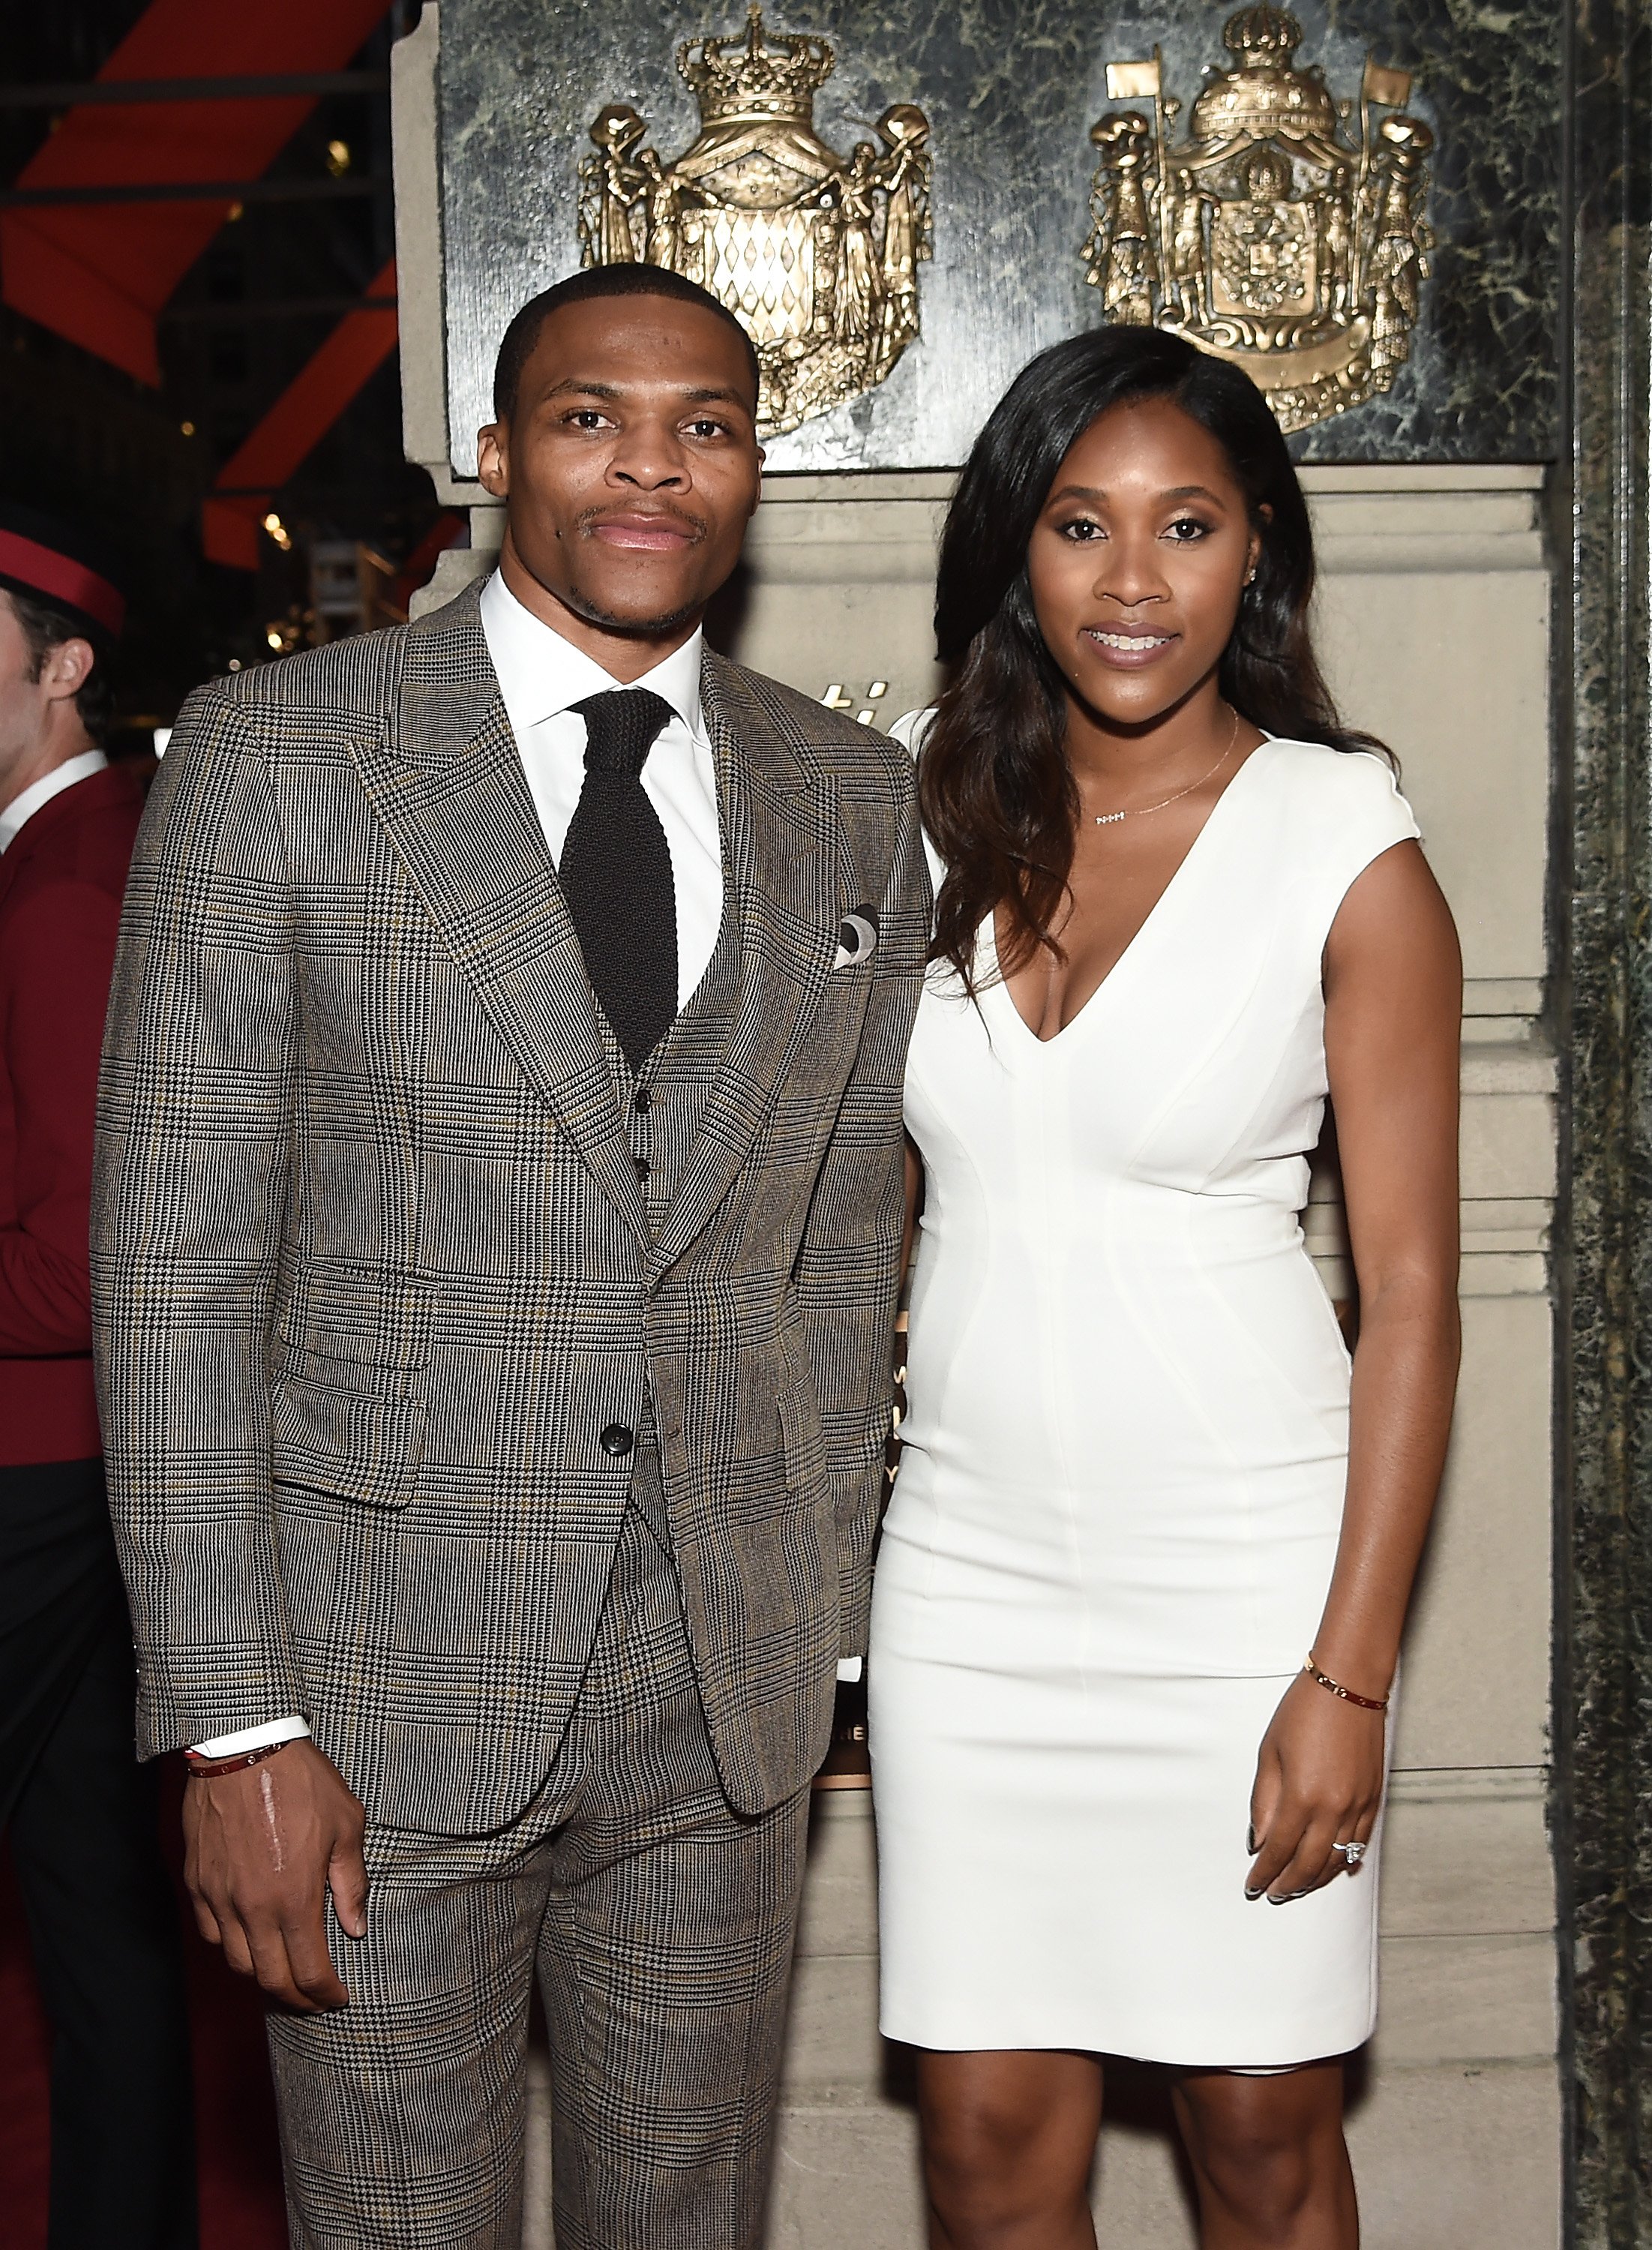 Russell Westbrook and wife Nina at The Cartier Fifth Avenue Grand Reopening Event at the Cartier Mansion on September 7, 2016 in NYC. | Photo by Nicholas Hunt/Getty Images